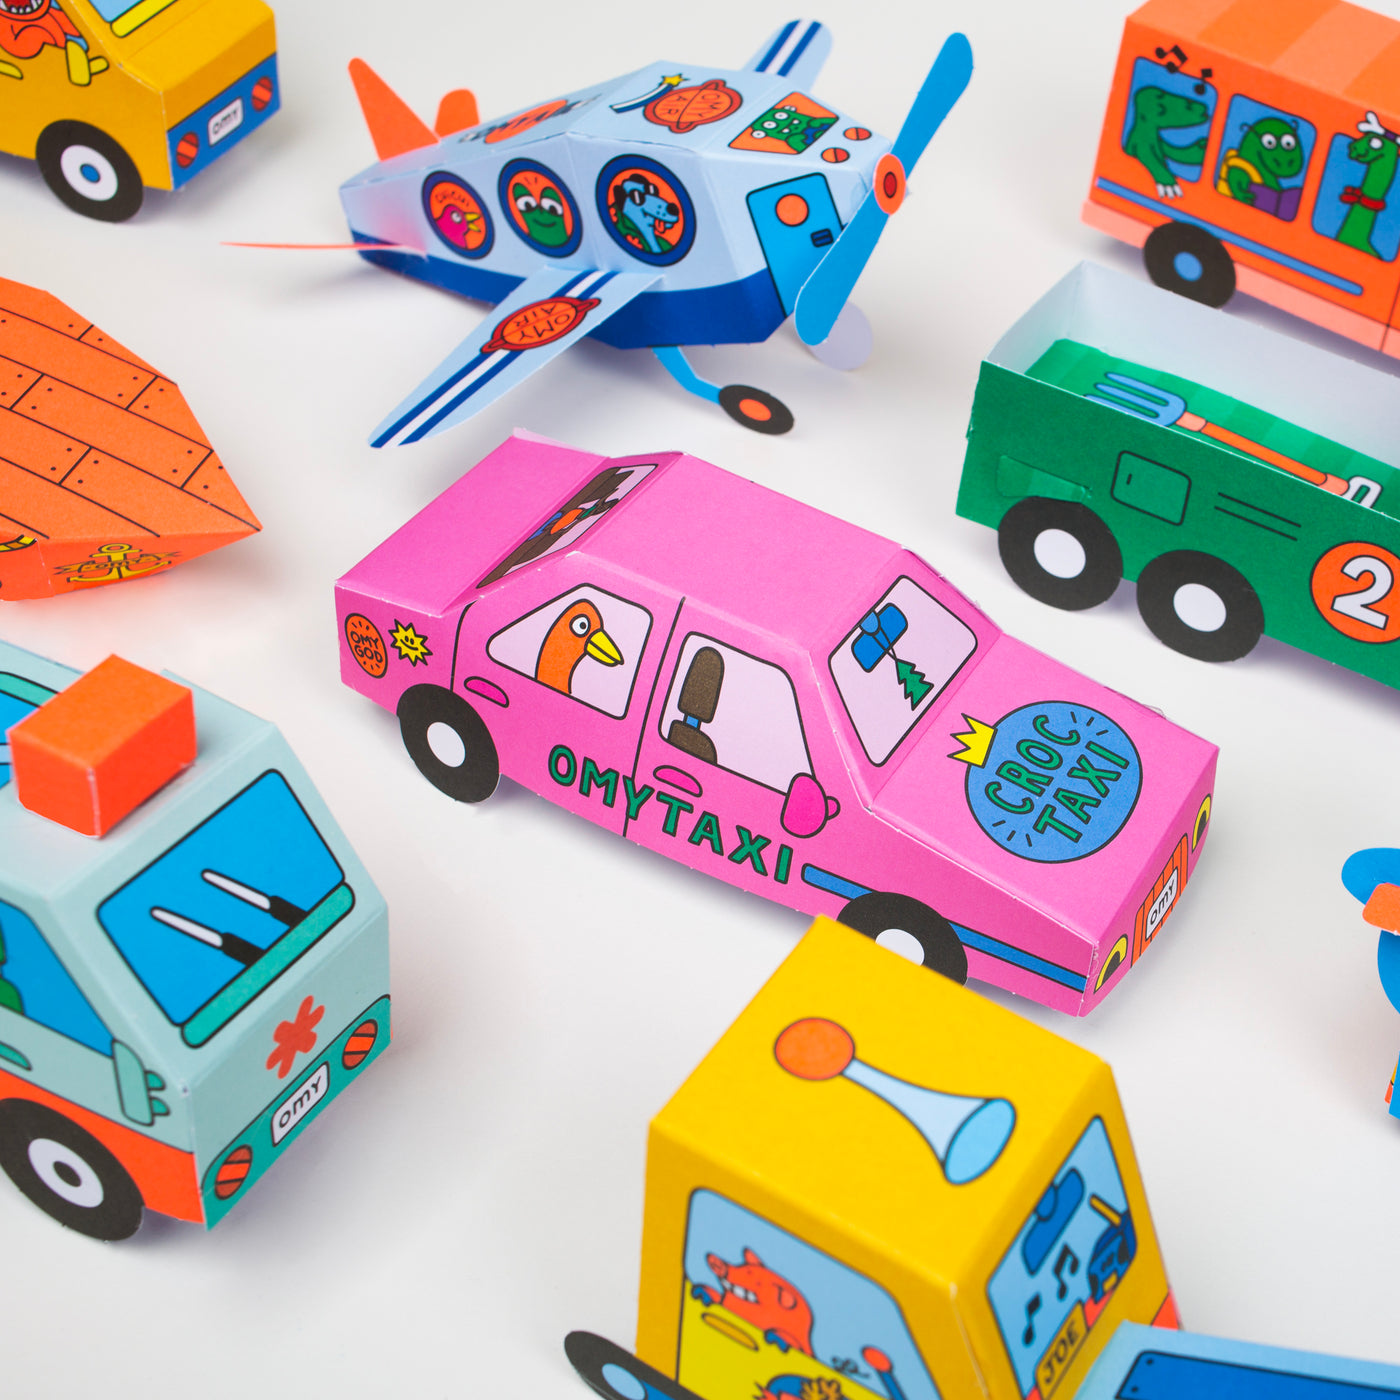 Vroom paper toys (6+ years)